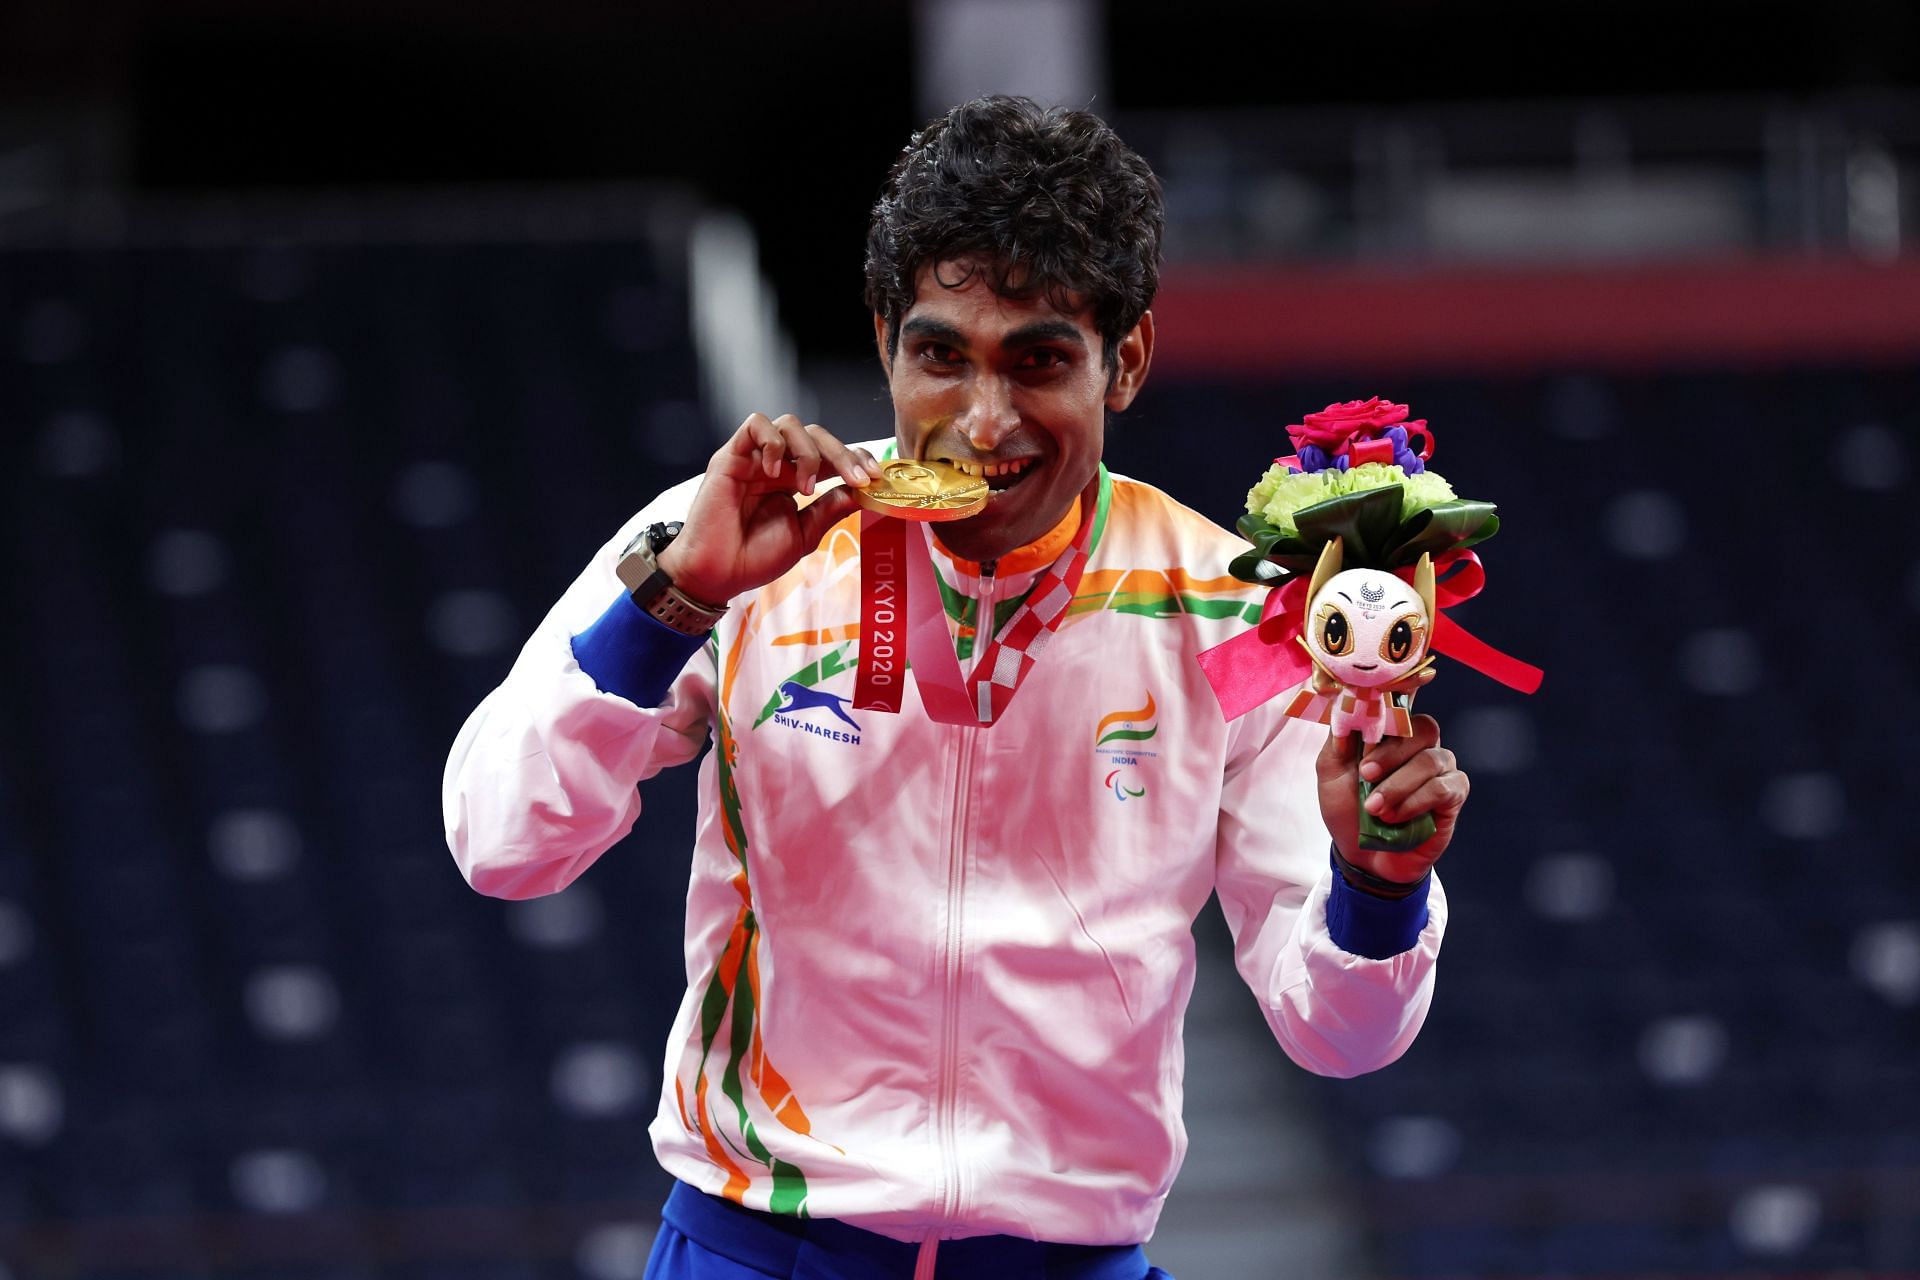 Pramod Bhagat with his gold medal at the Tokyo Paralympics. (PC: Getty Images)